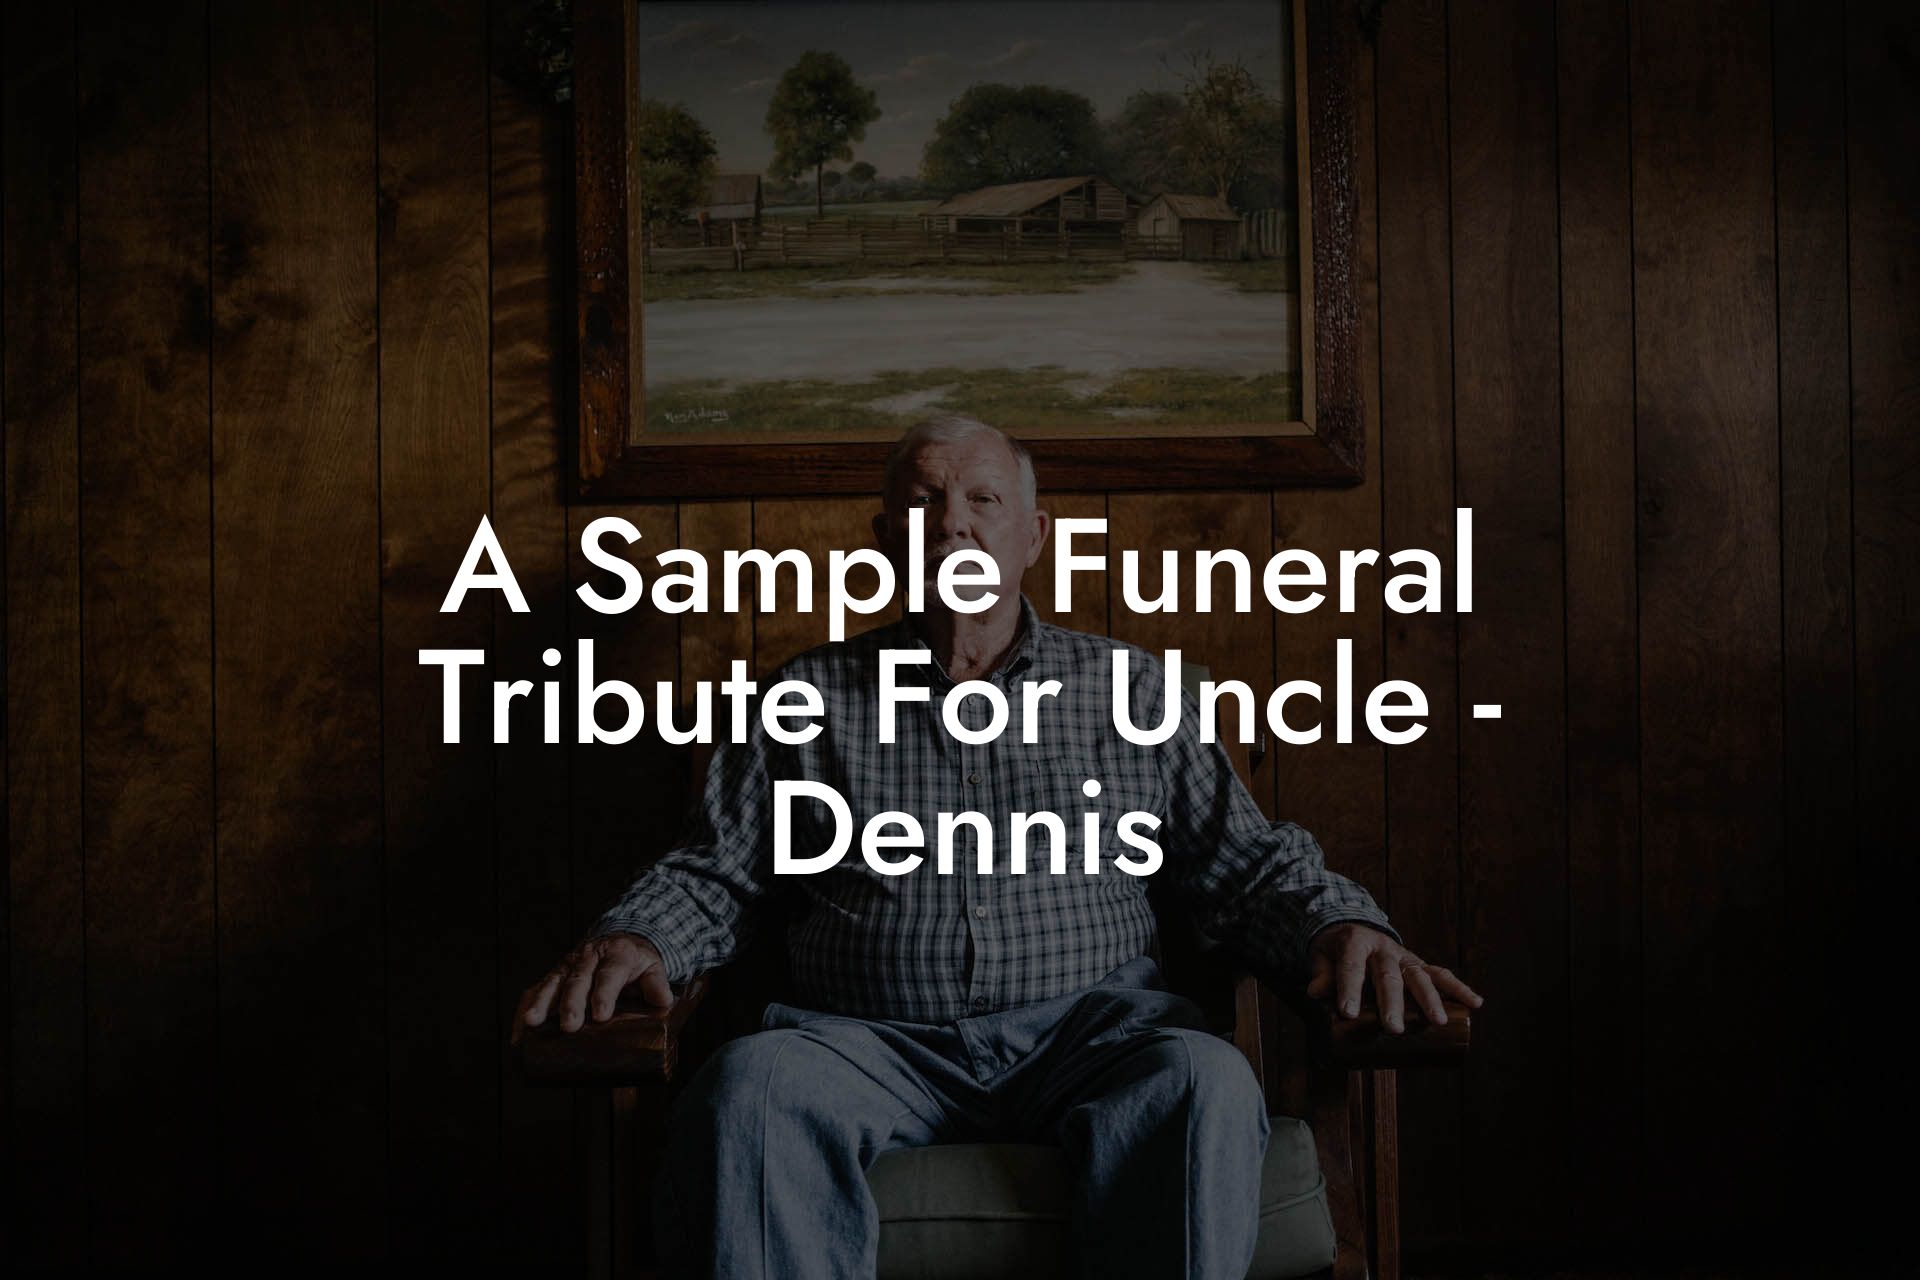 A Sample Funeral Tribute For Uncle - Dennis